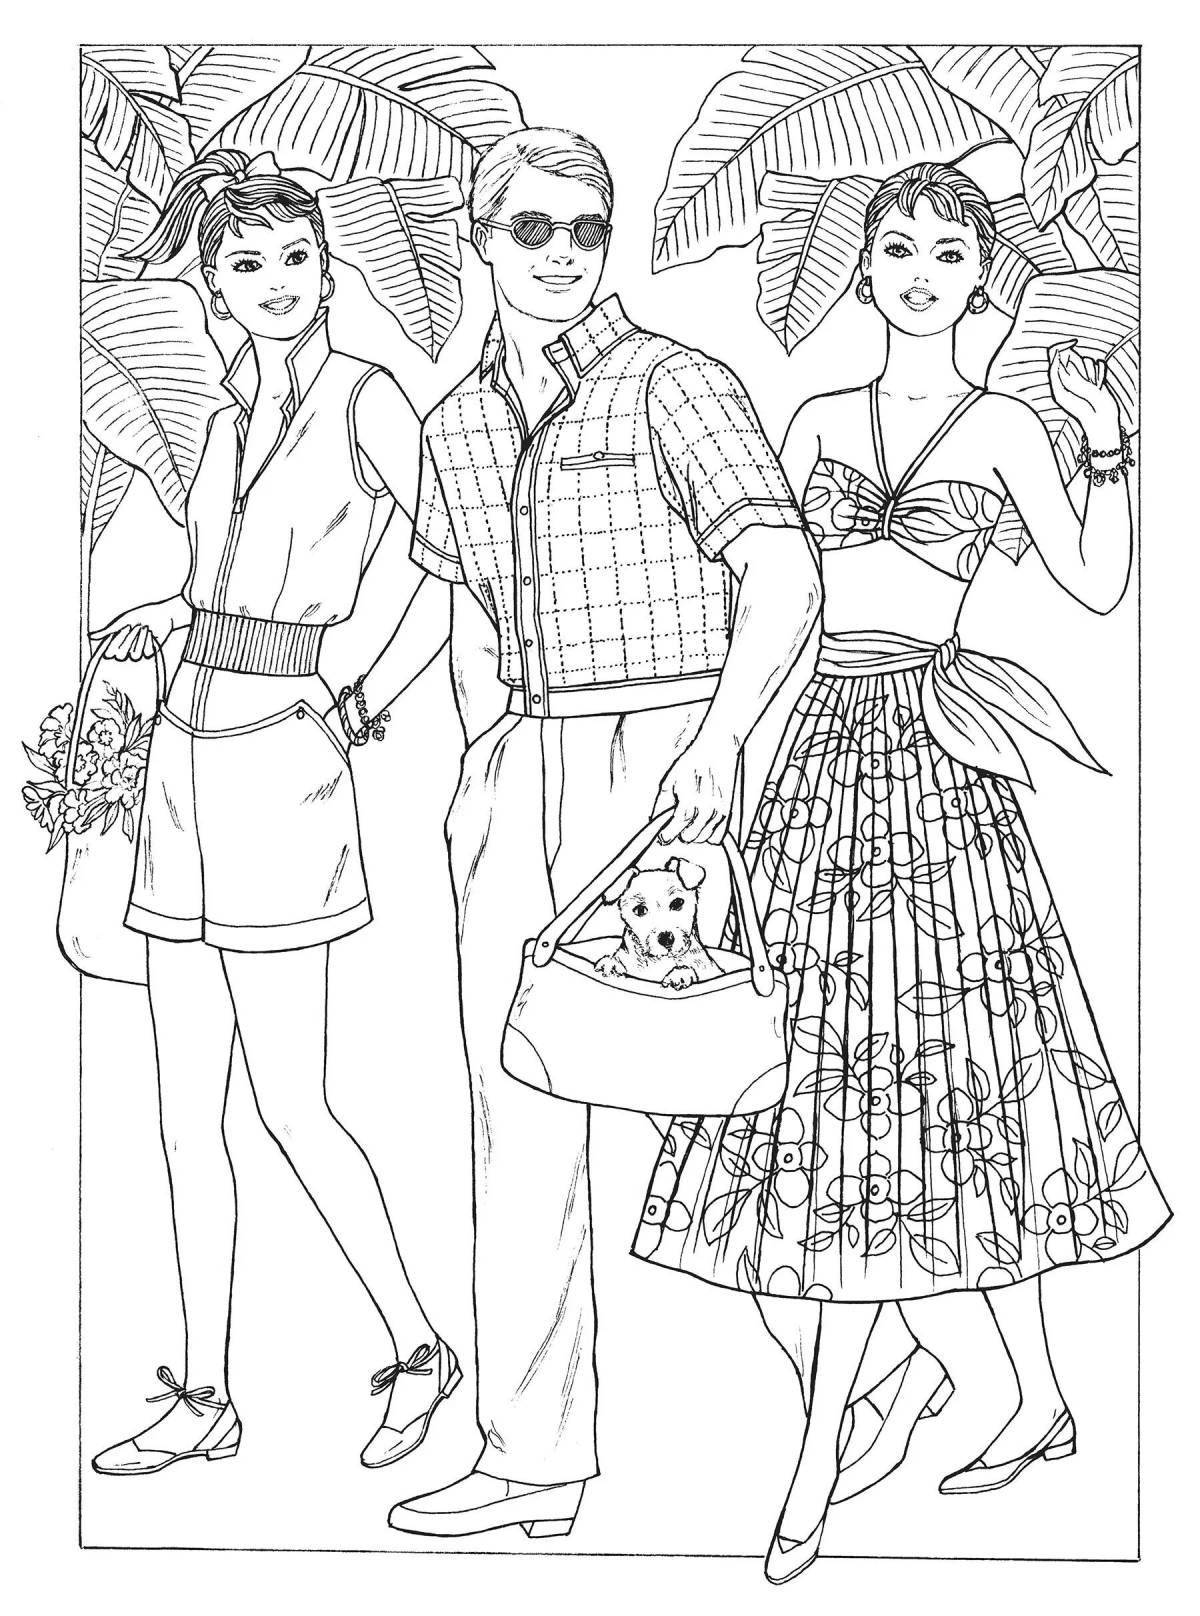 Coloring page cheerful woman and man